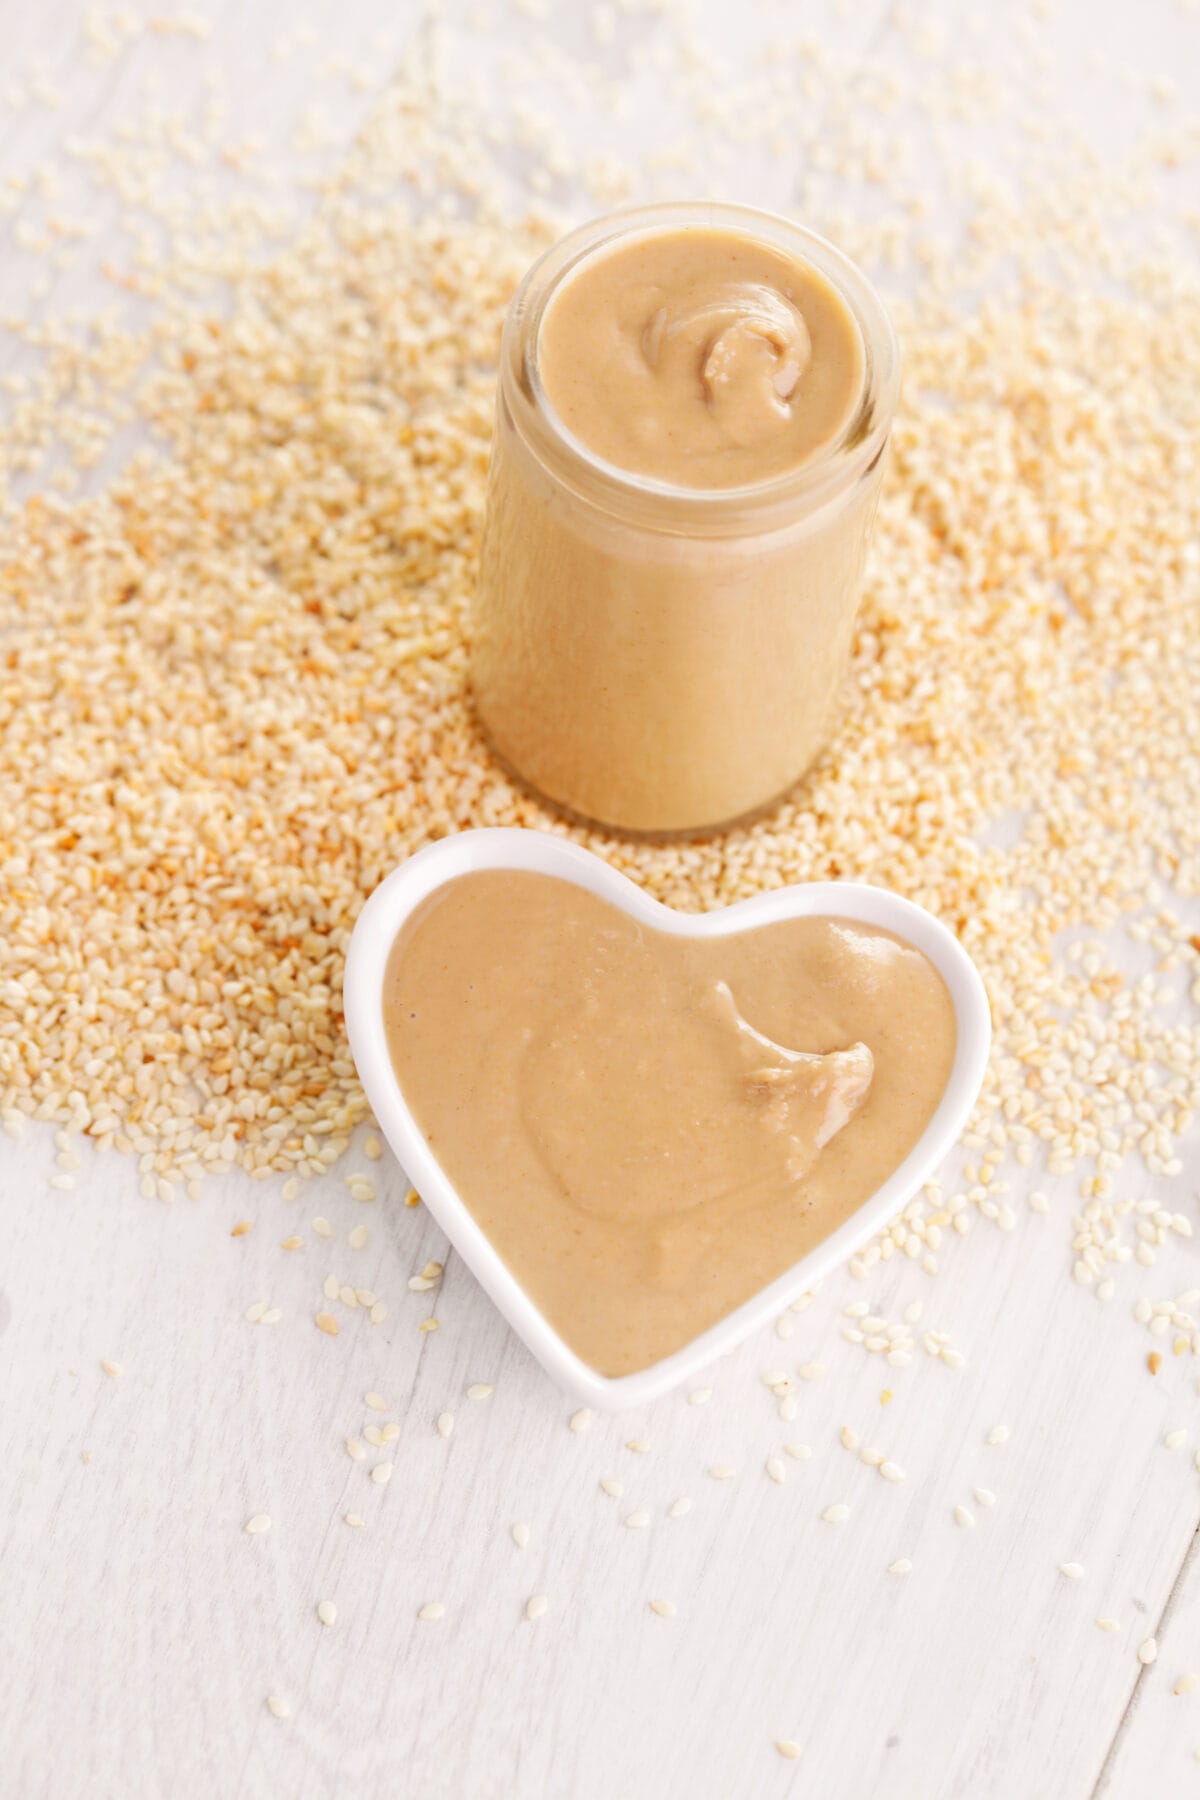 a clear jar and a heart shaped dish full of tahini paste